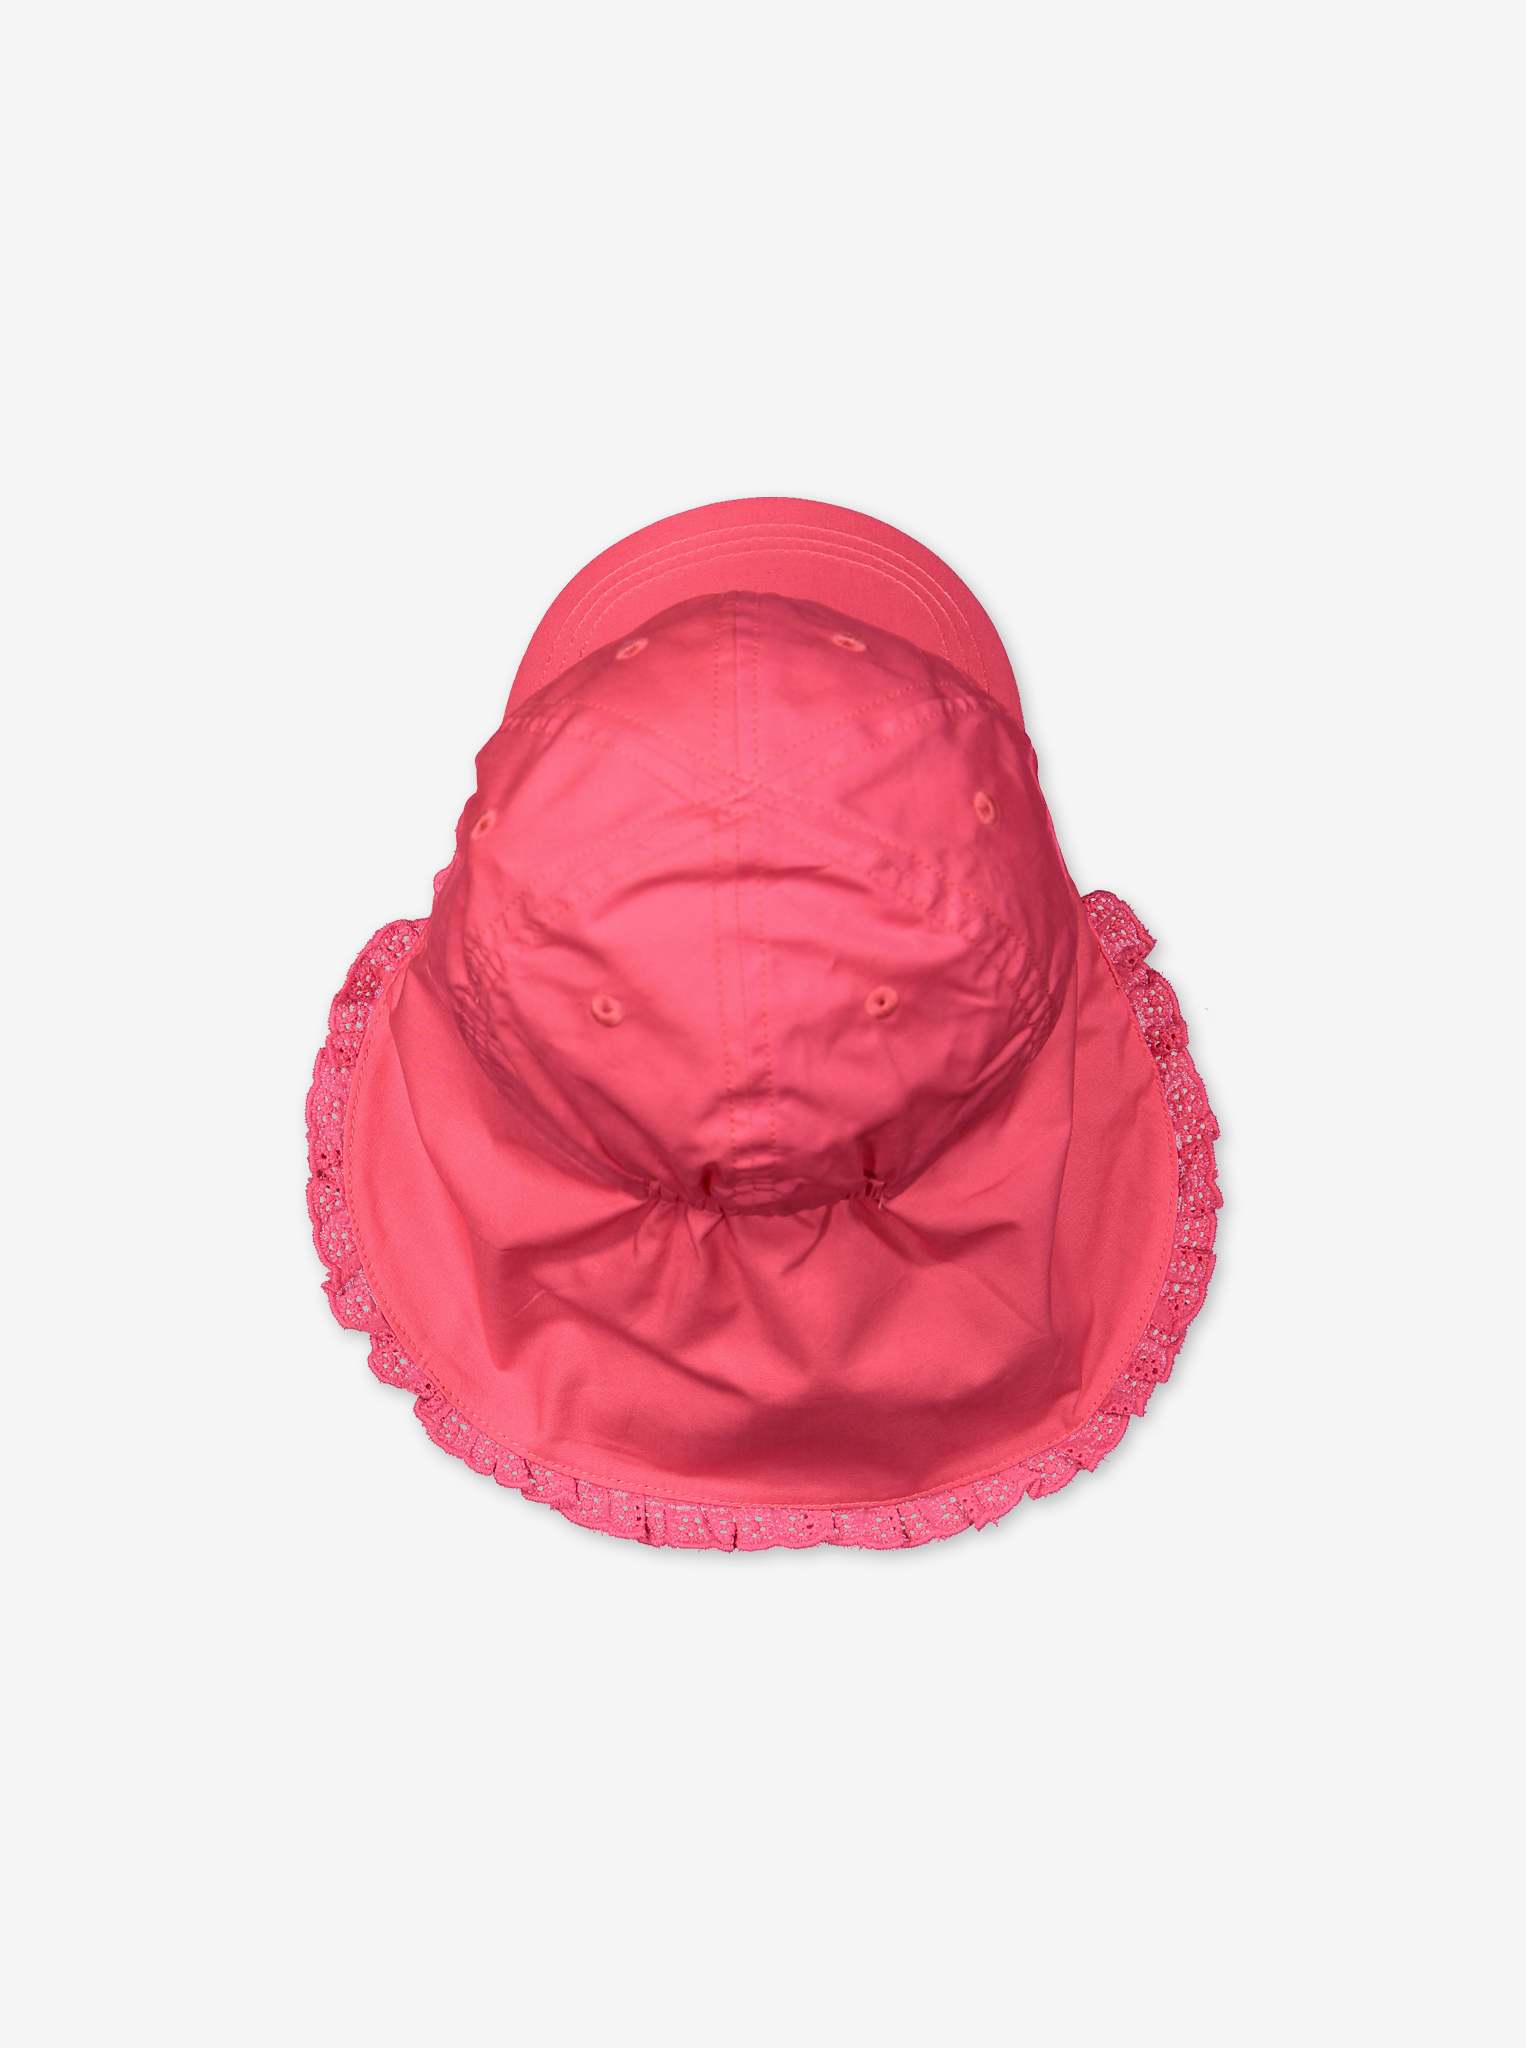 Sun cap with UV protection-Unisex-9m-9y-Pink